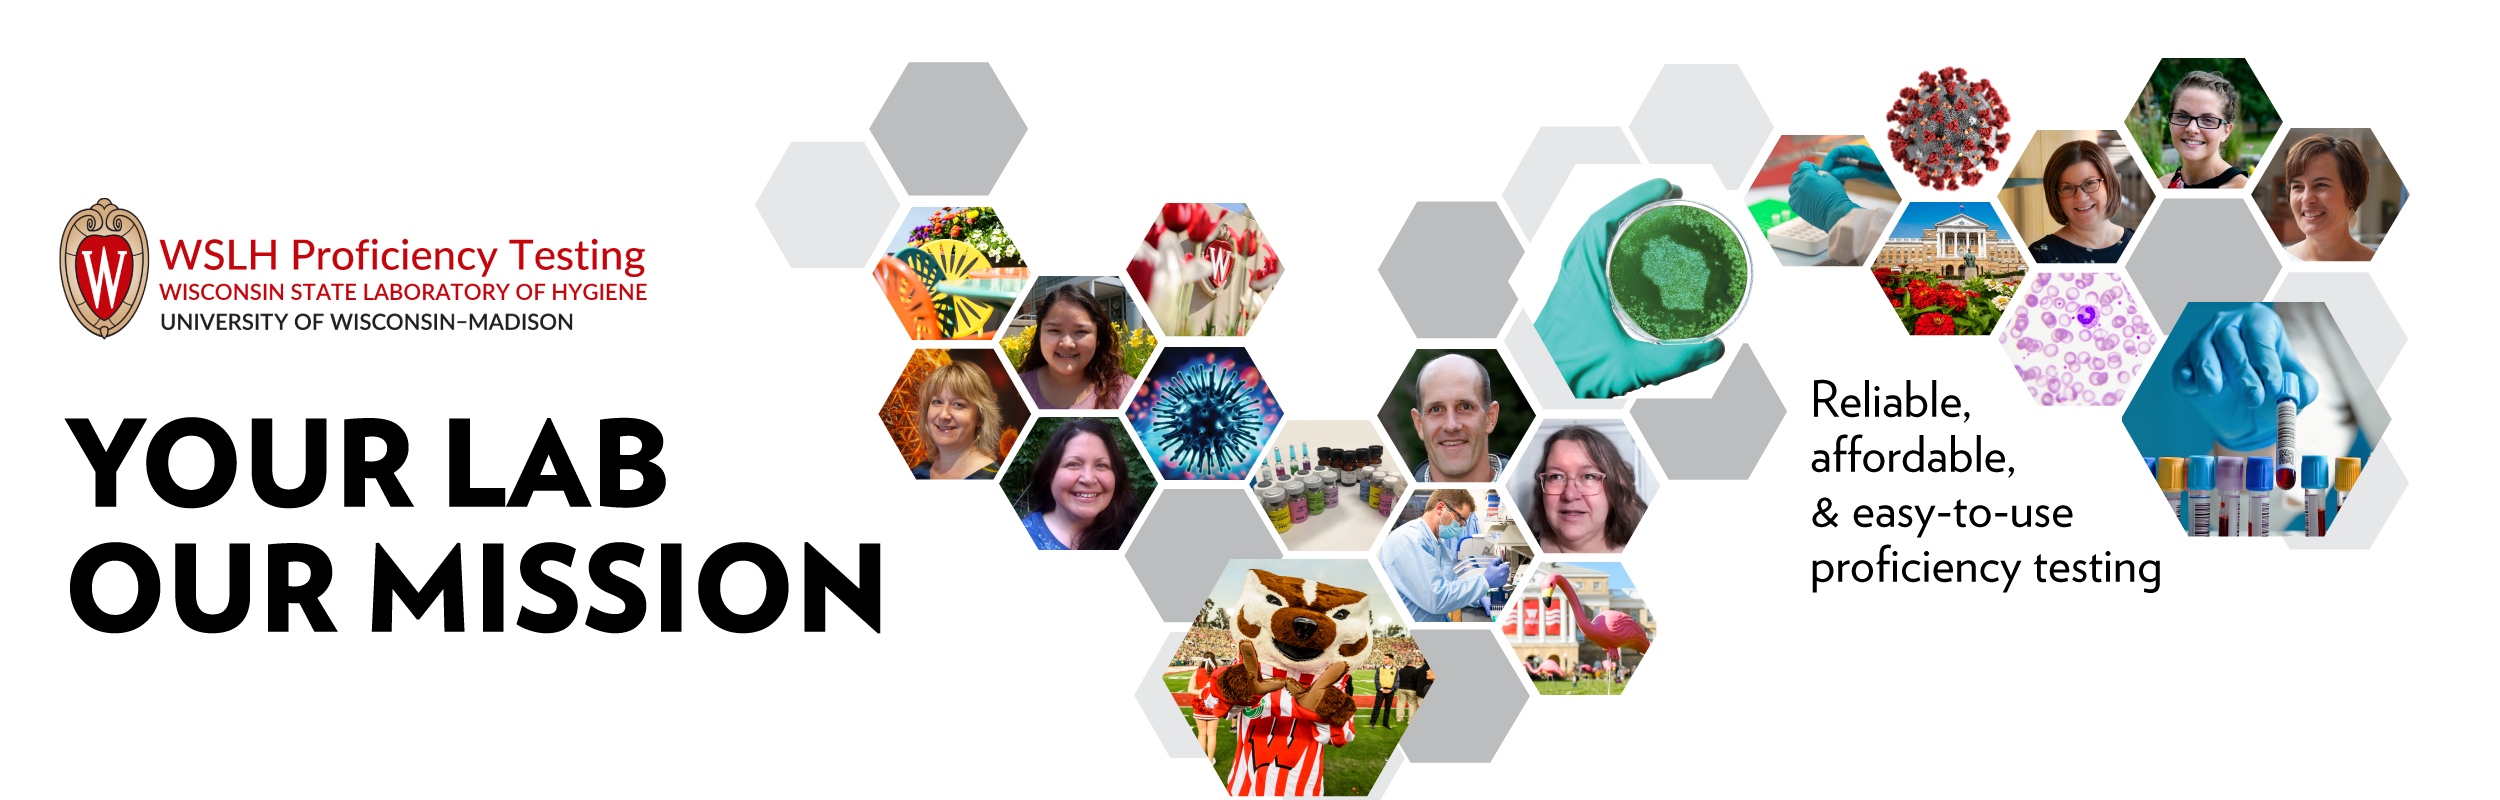 Tiled image with pictures of WSLHPT Staff and Lab